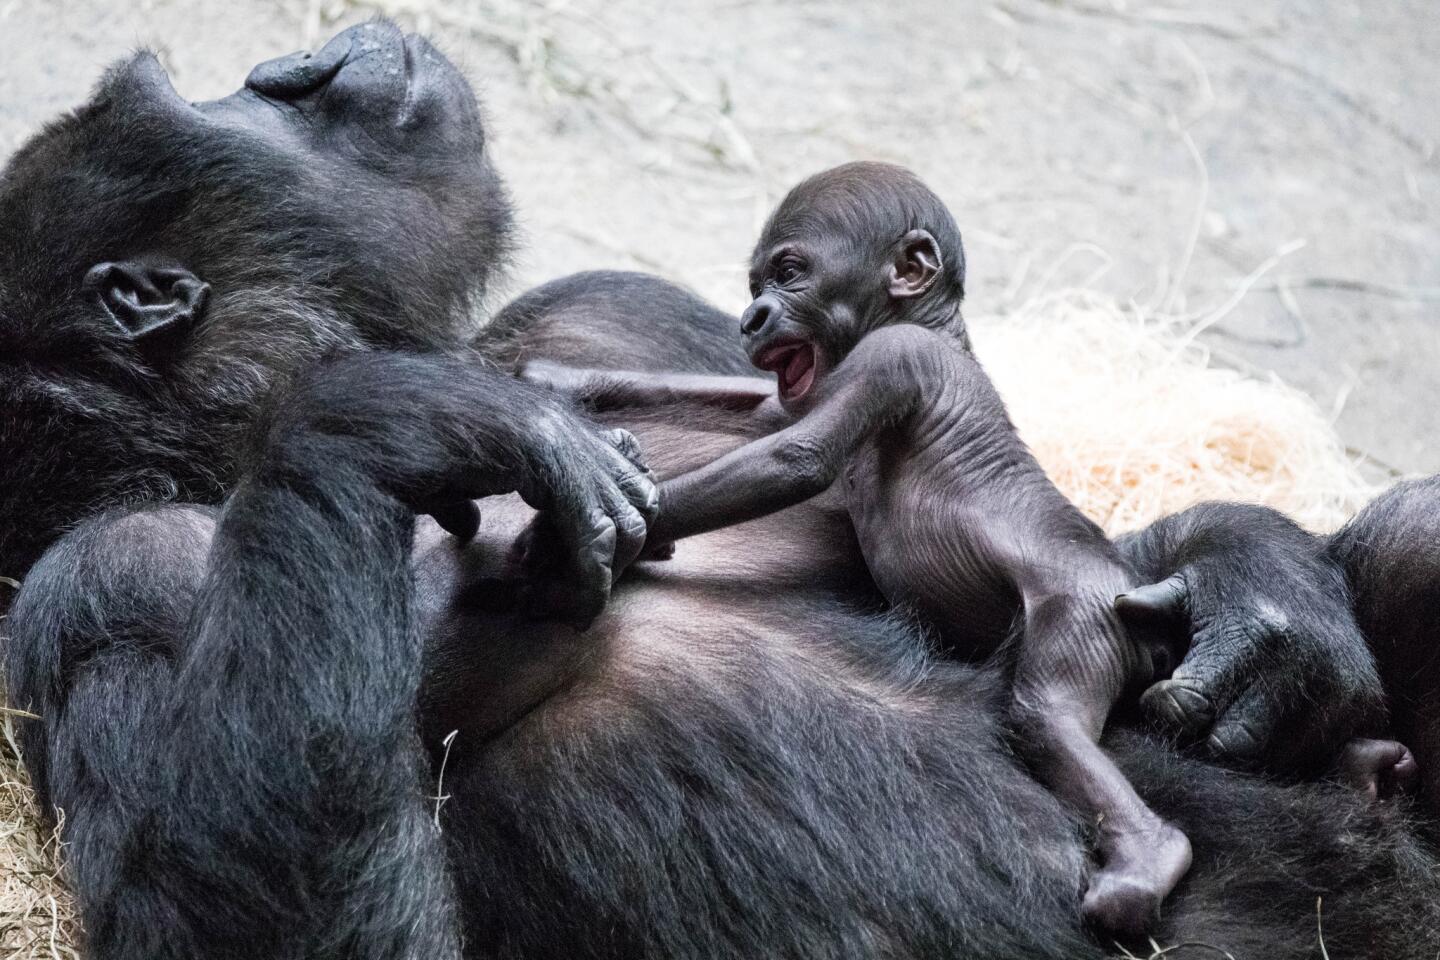 Ali, a 1-month-old western lowland gorilla, pushes against her mom, Koola, at the Brookfield Zoo, on July 2, 2018, in Brookfield.